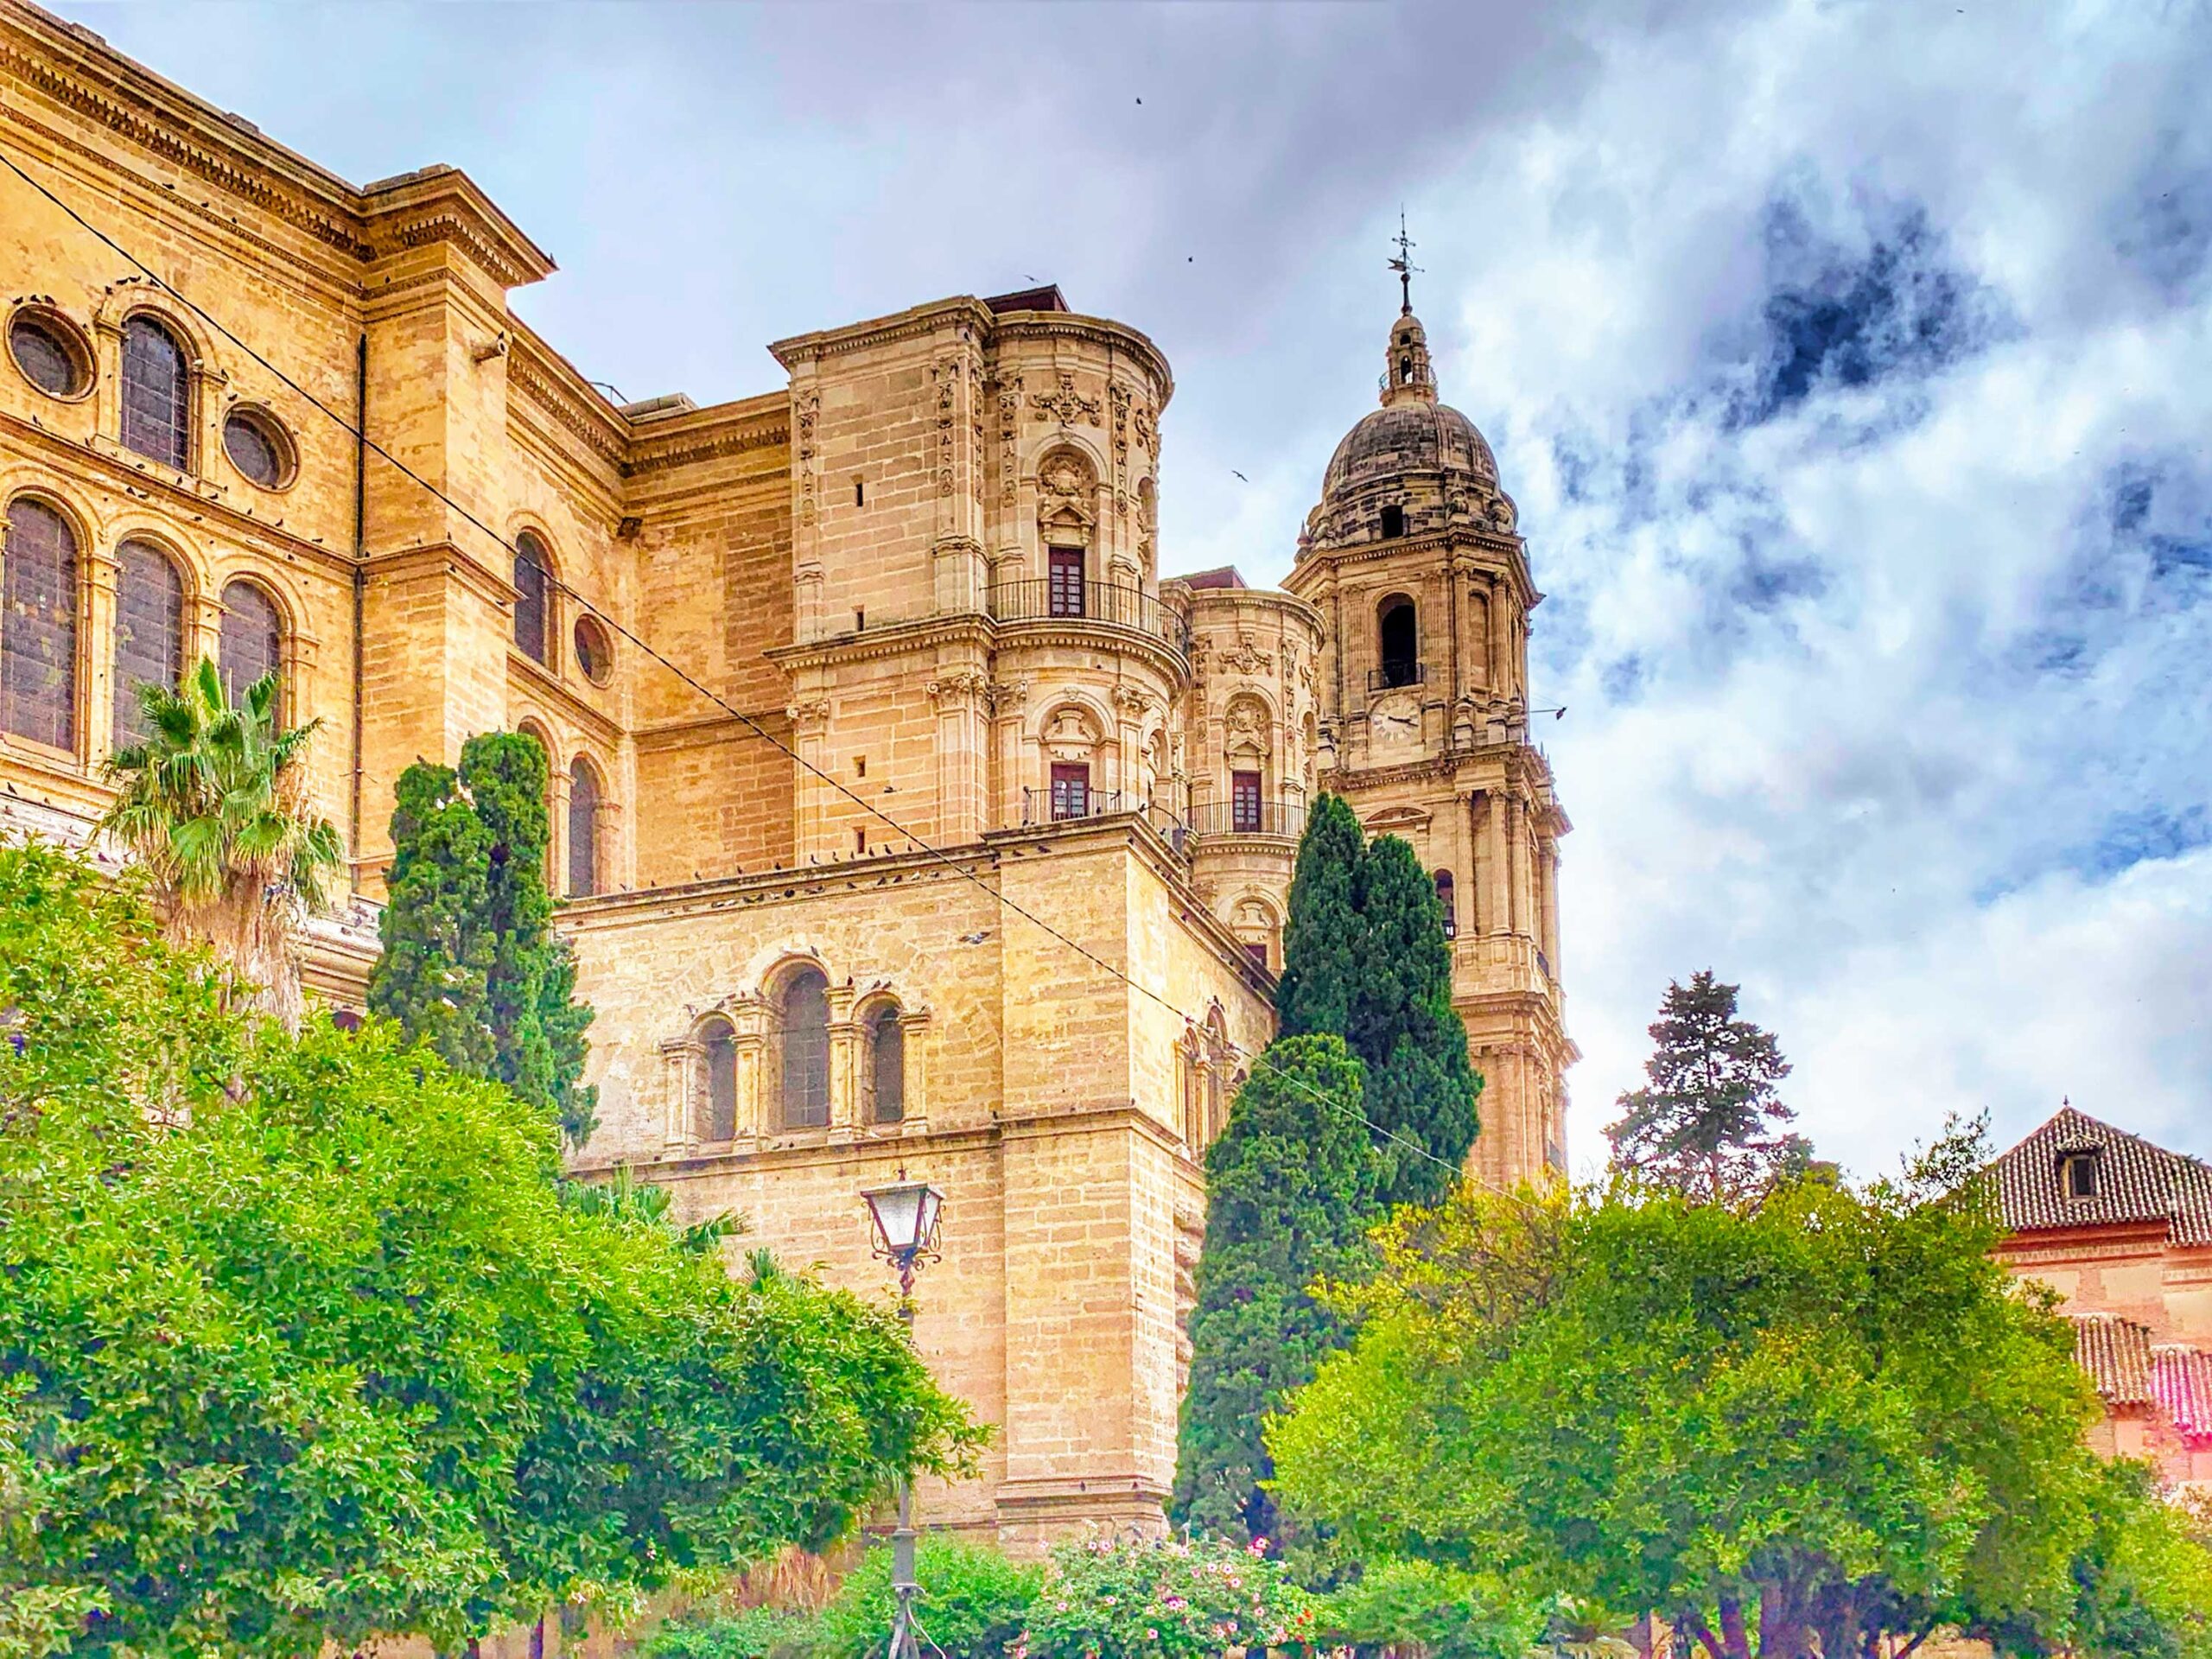 Malaga Cathedral cathedral boasts an impressive blend of Gothic and Renaissance styles.